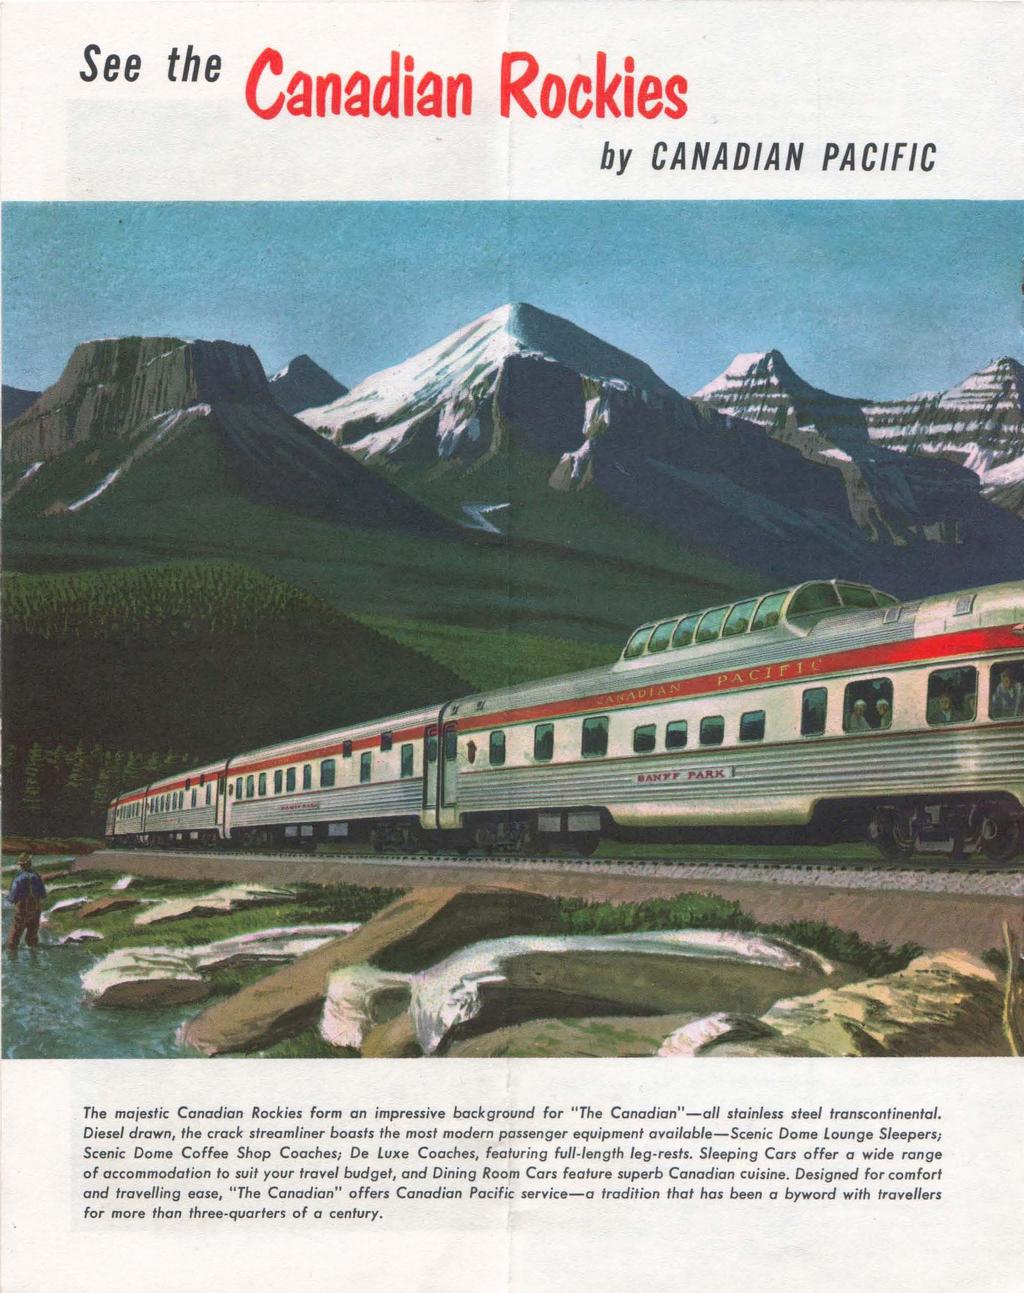 See the Canadian Rockies by CANADIAN PACIFIC The majestic Canadian Rockies form an impressive background for "The Canadian"-all stainless steel transcontinental.